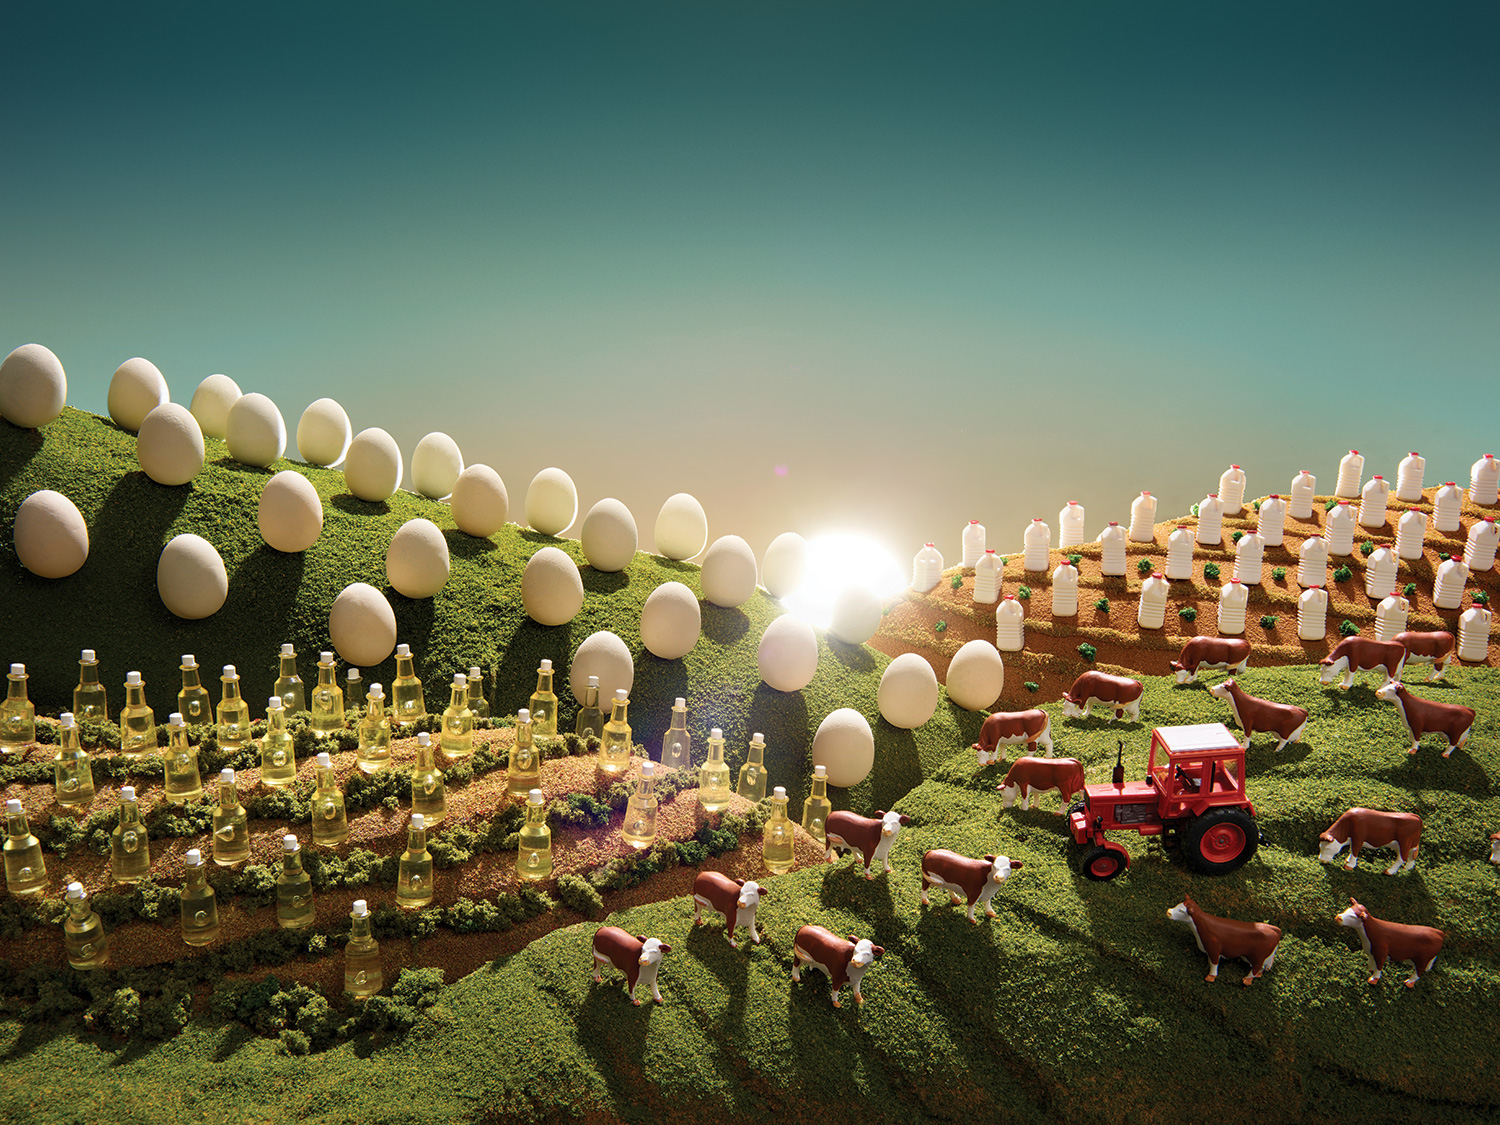 Can industrial farming be a force for good?